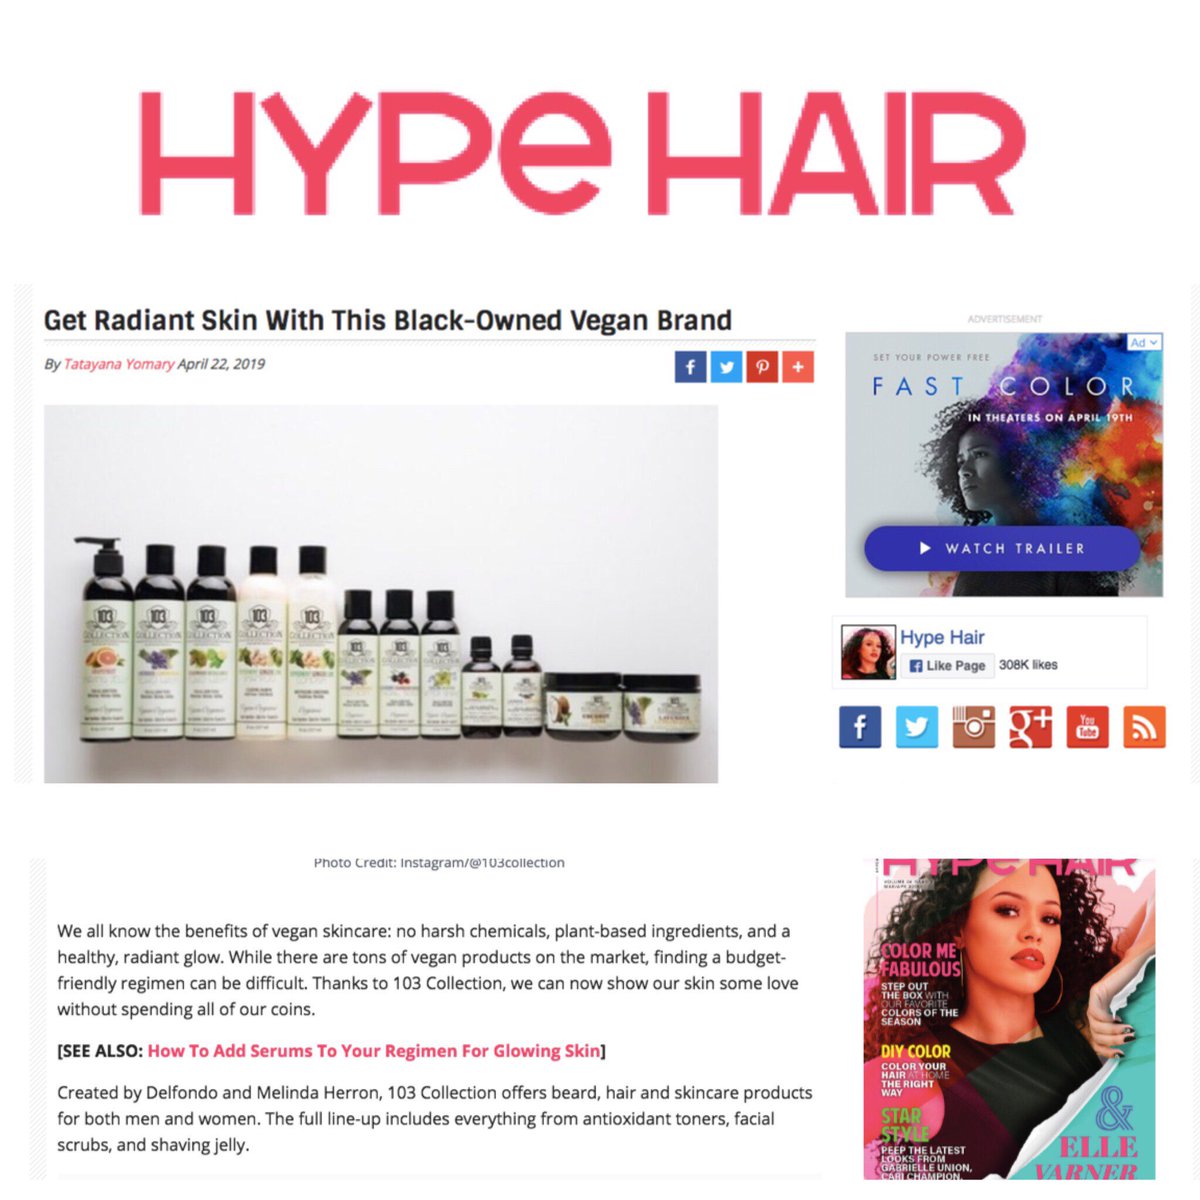 Even @HypeHair is sharing how you can get radiant skin with our plant based skin care. 103collection.com
.
.
#beauty #vegan #plantbased #skin #skincare #hypehair #glowingskin #healthy #gogreenforbae #103collection #gogreenforbae #103beautybelle #crueltyfree #naturalbeauty